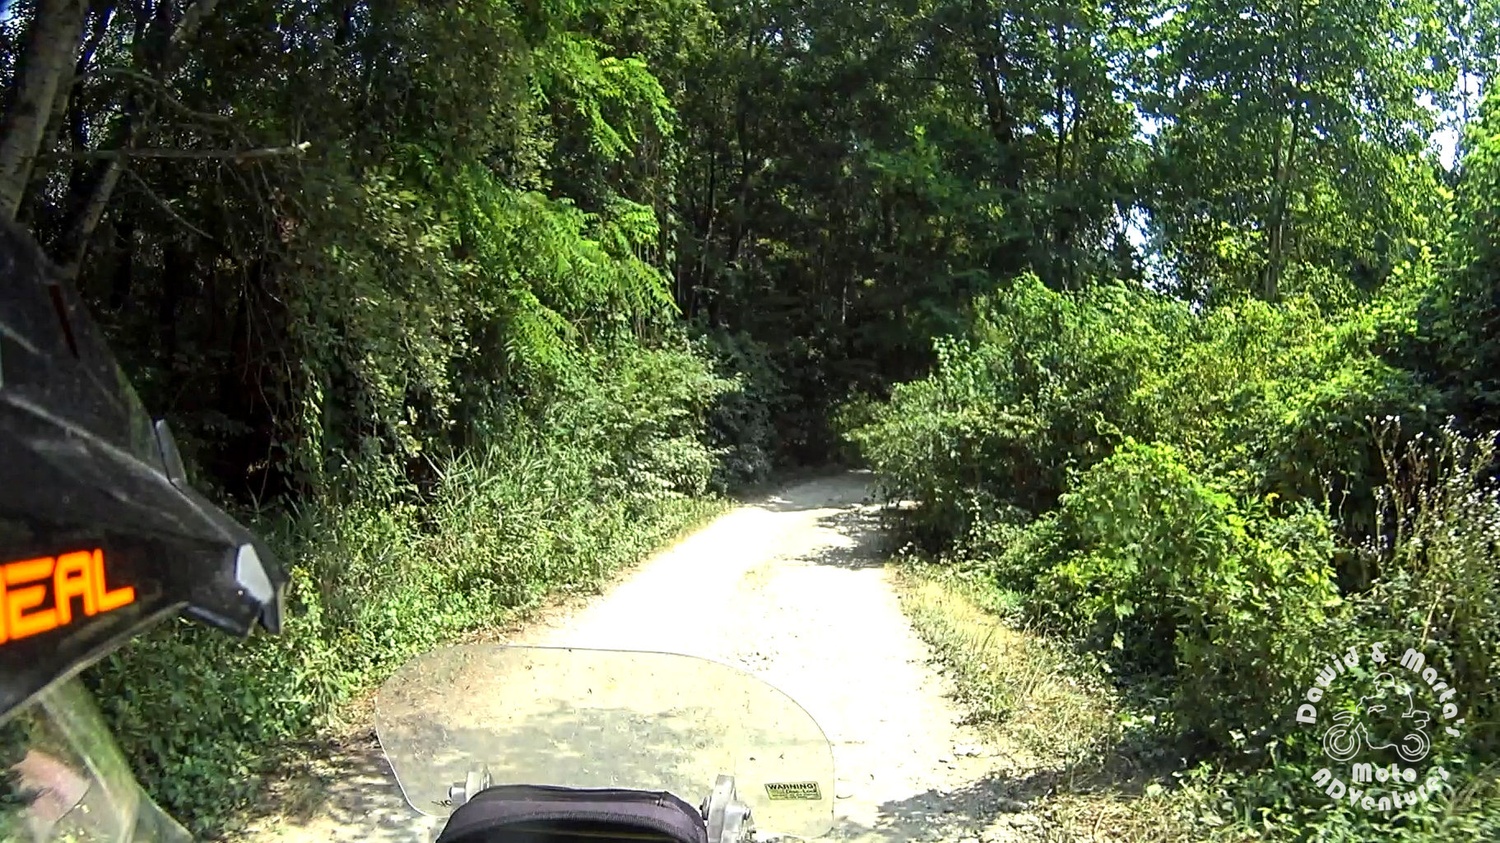 Leaving camping at Drava River and riding offroad through forest